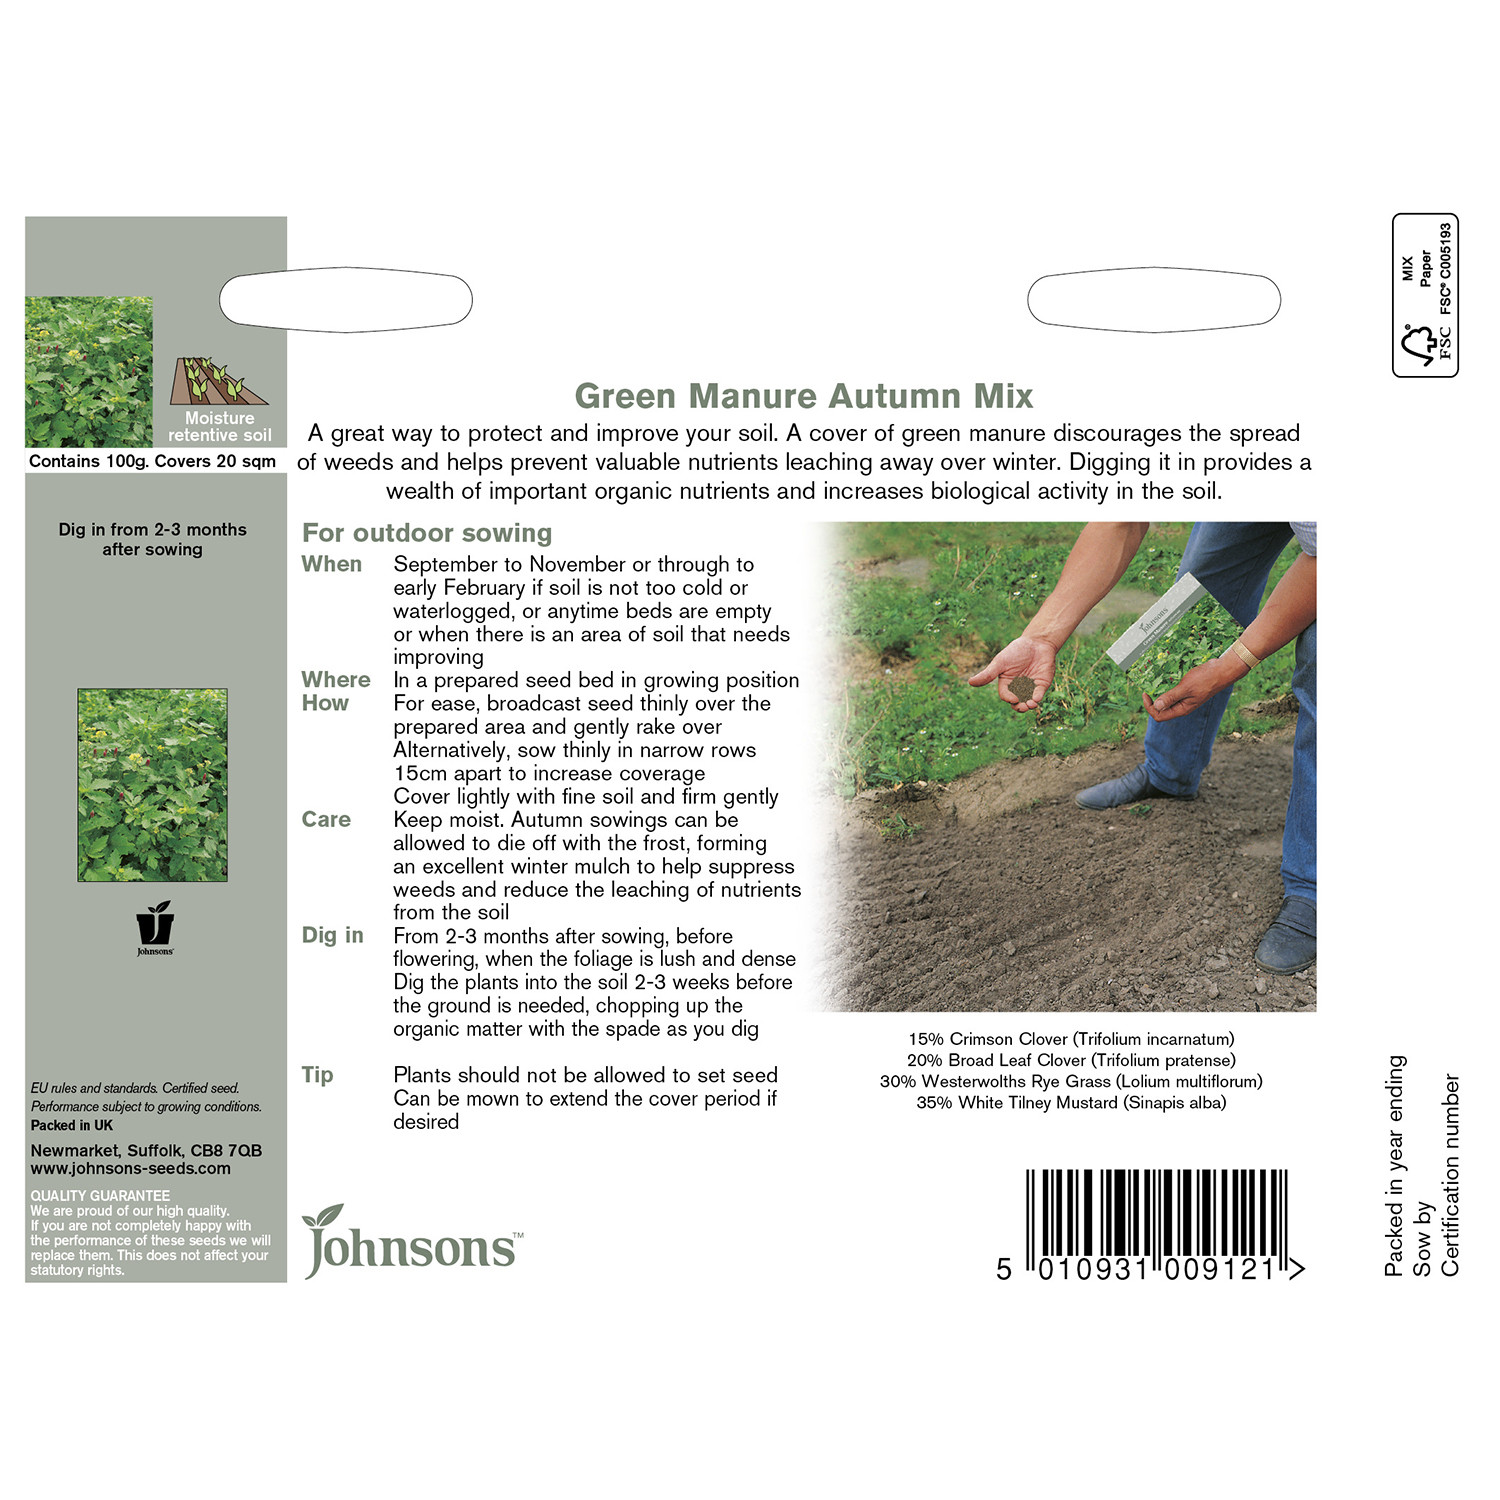 Pack of Green Manure Autumn Mix Image 2